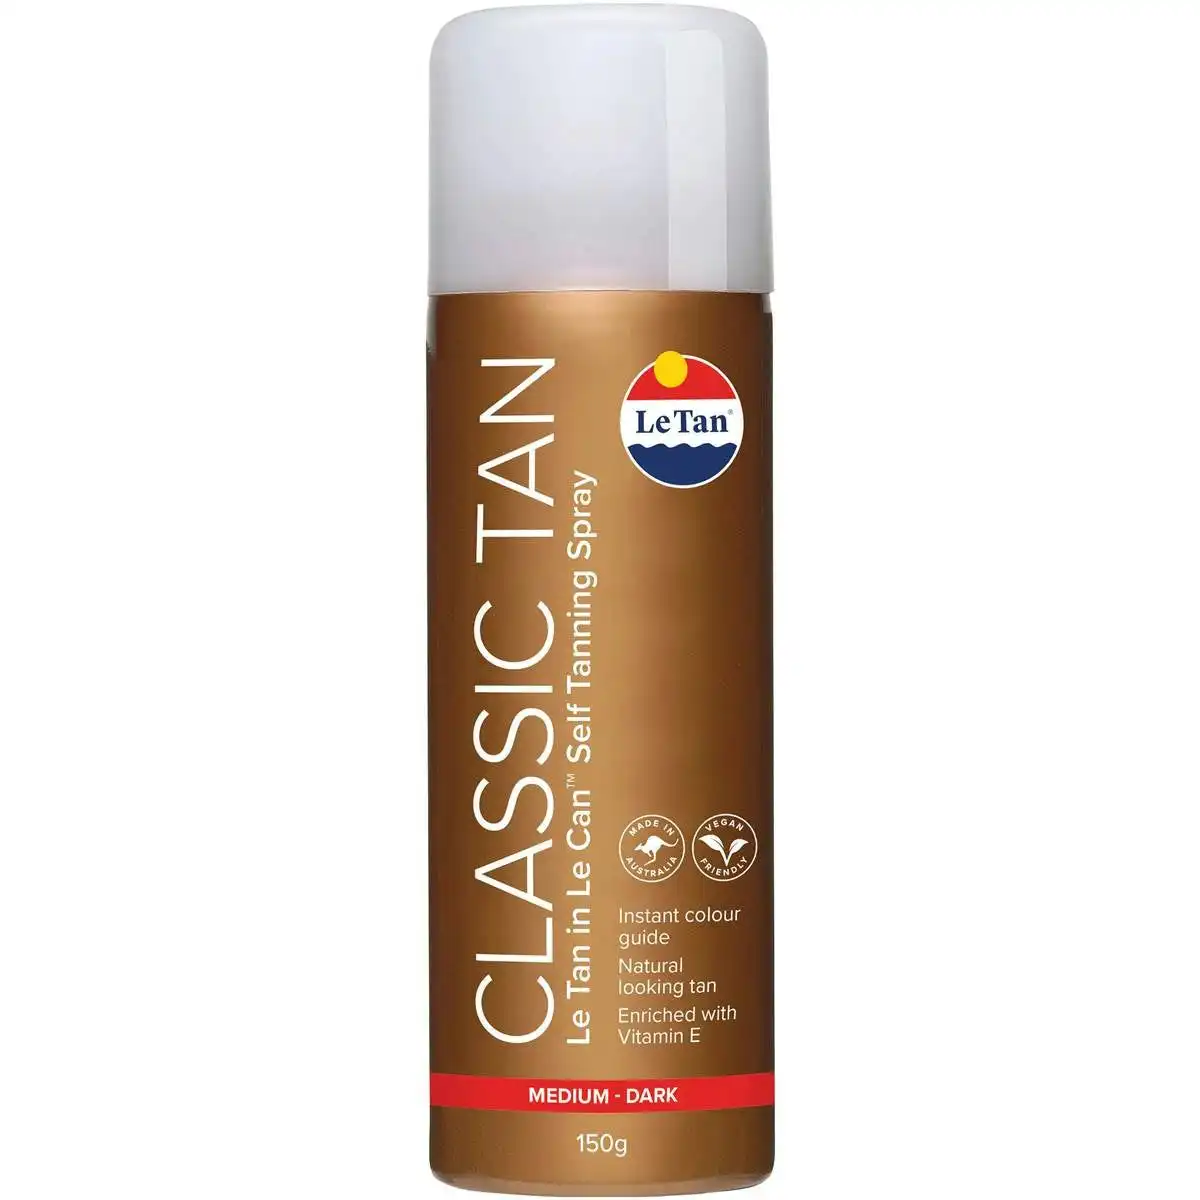 Le Tan In Le Can Deep Bronze 150g